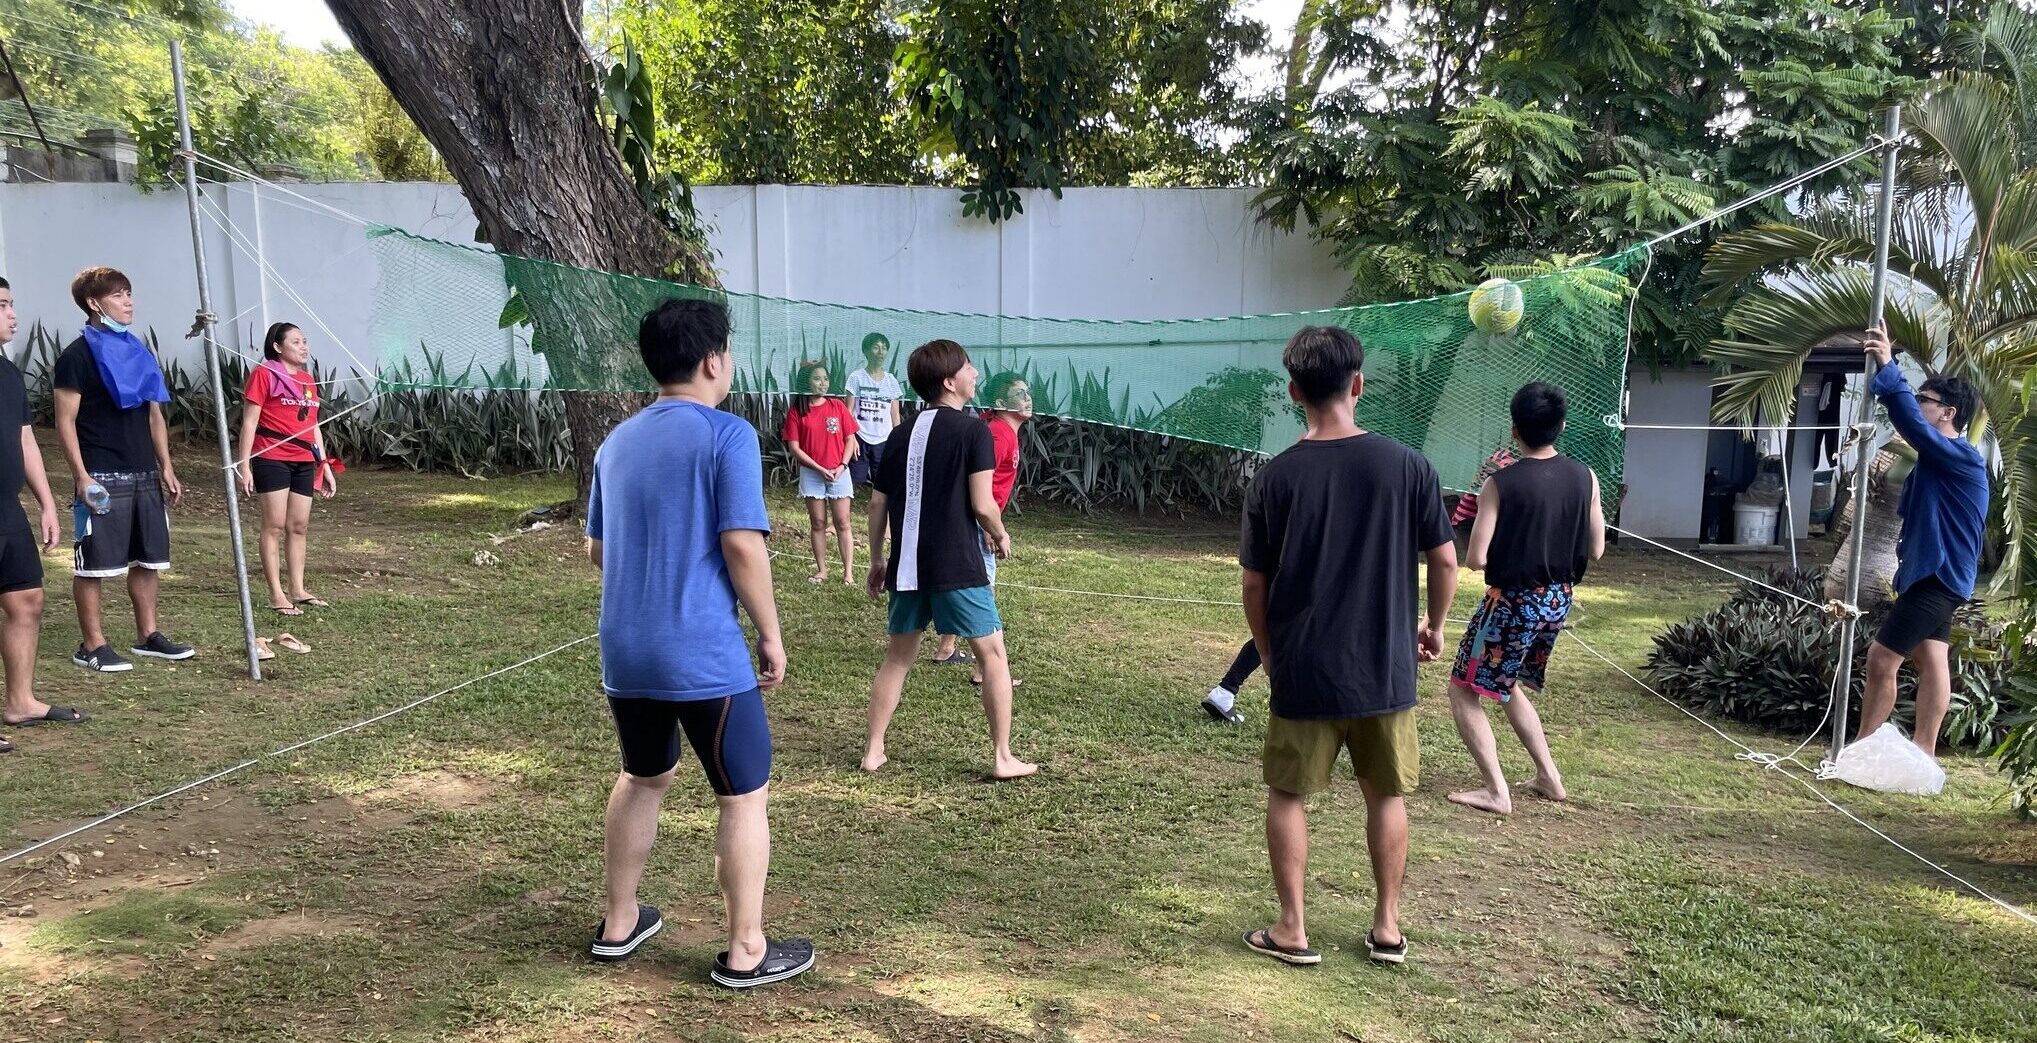 Members playing volleyball during team building